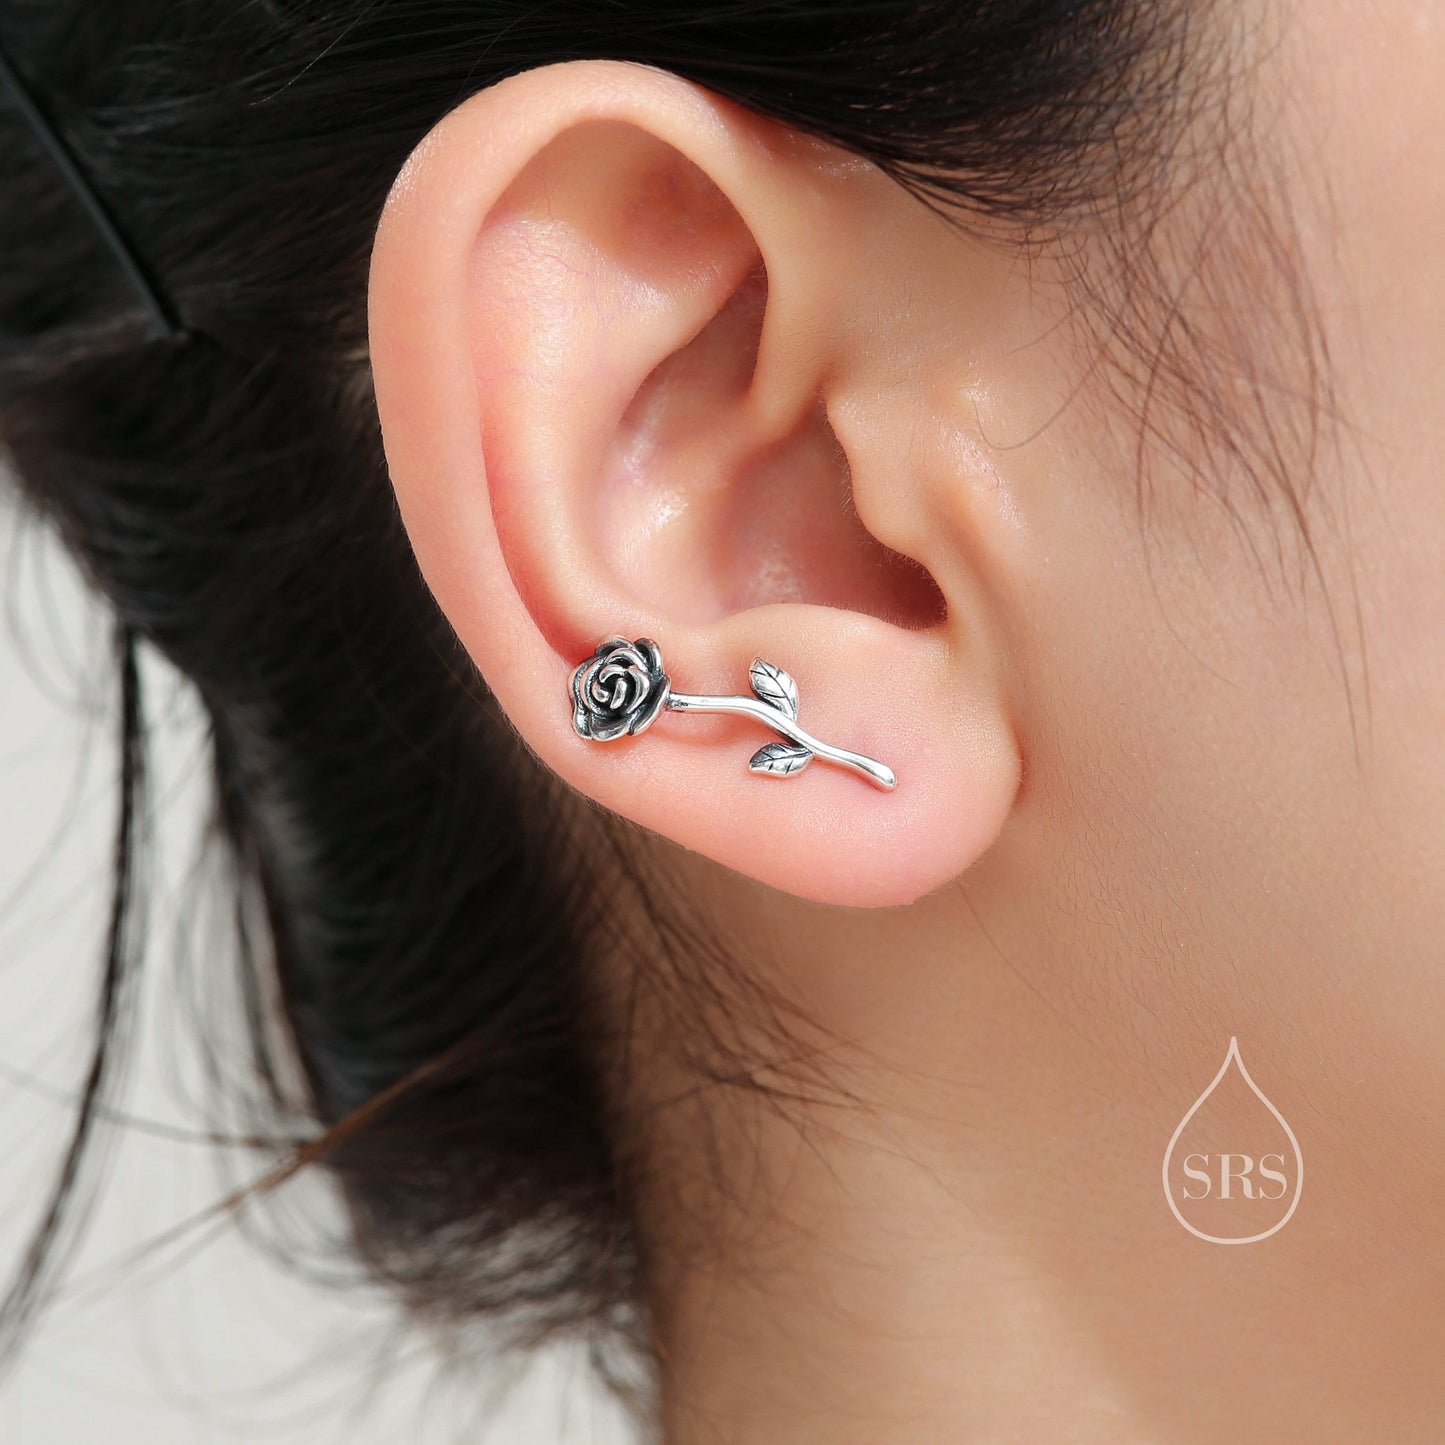 Rose Flower Crawler Earrings in Sterling Silver, Oxidised Silver or Two Tone, Nature Inspired Ear Climbers, Rose Earrings